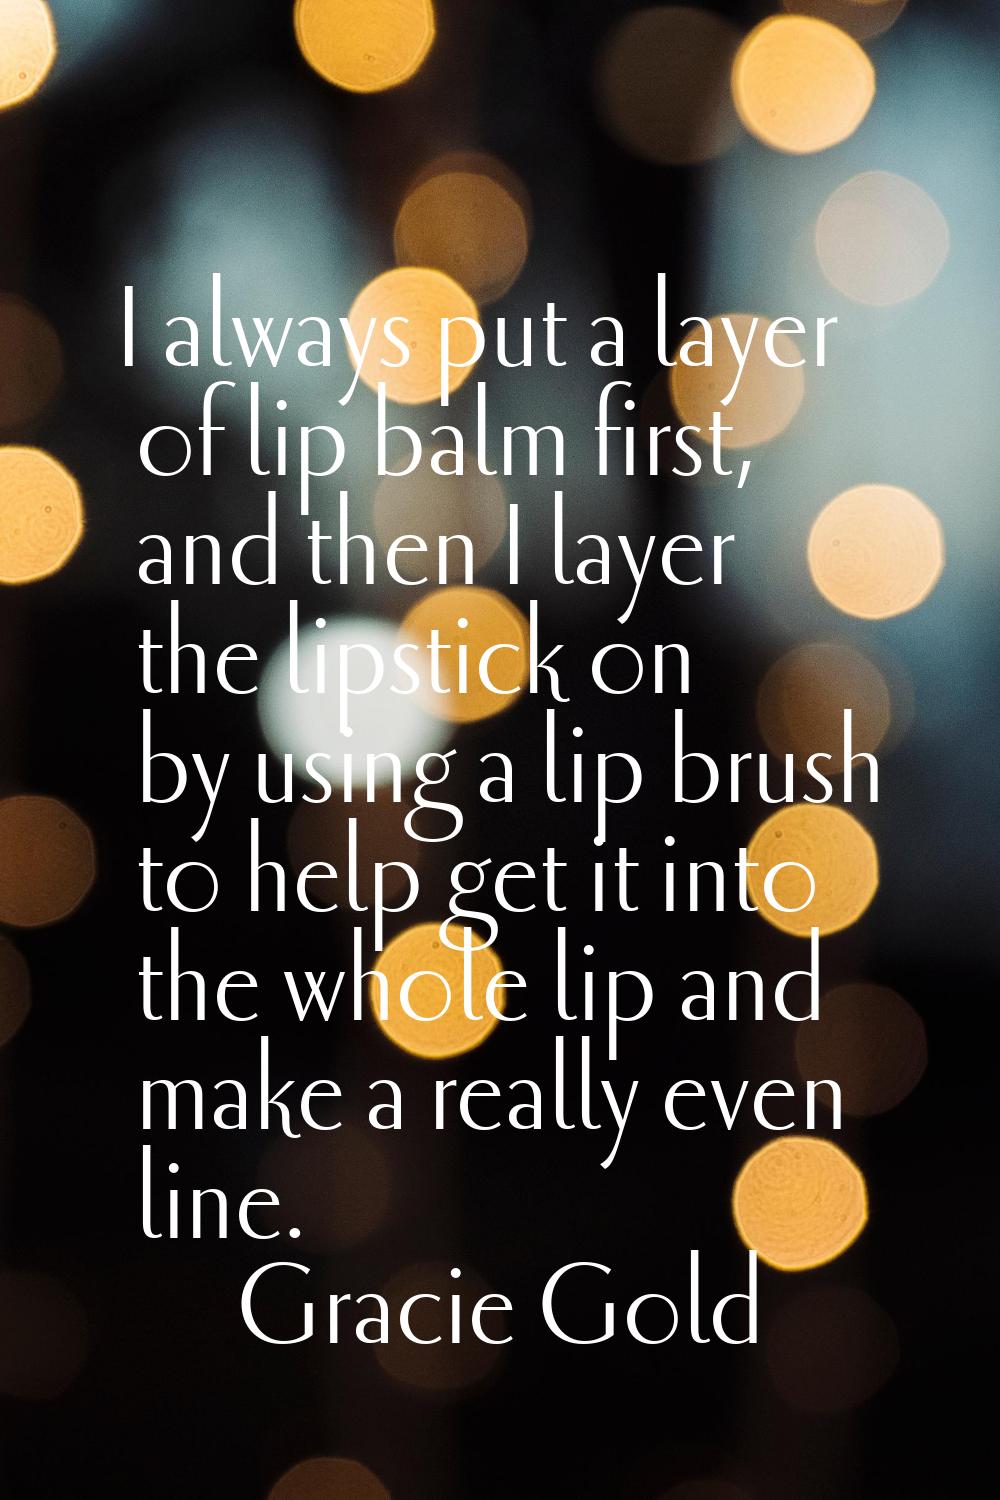 I always put a layer of lip balm first, and then I layer the lipstick on by using a lip brush to he